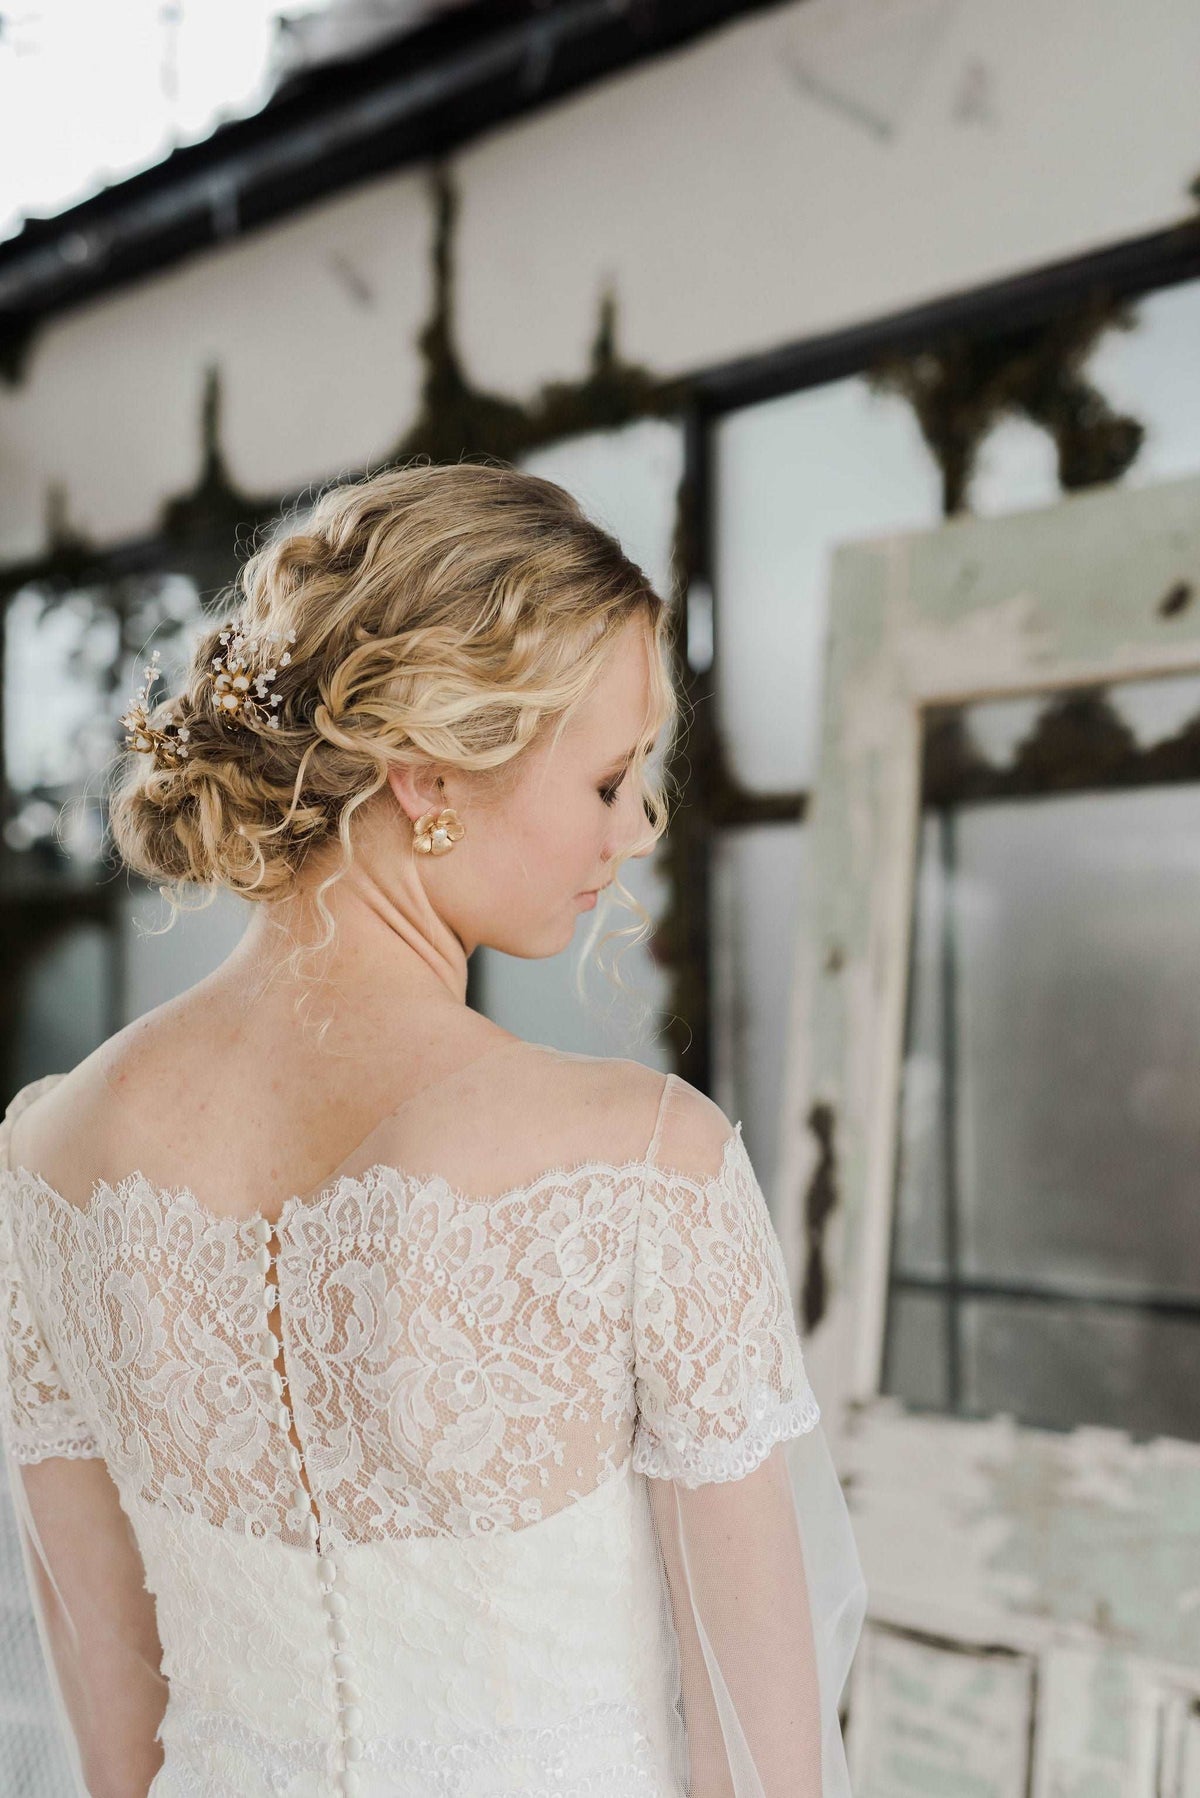 Delicate lace and tulle wedding dress with long sleeves by Catherine Langlois. Made to order in Toronto, Ontario, Canada. Photo by Destiny Dawn.